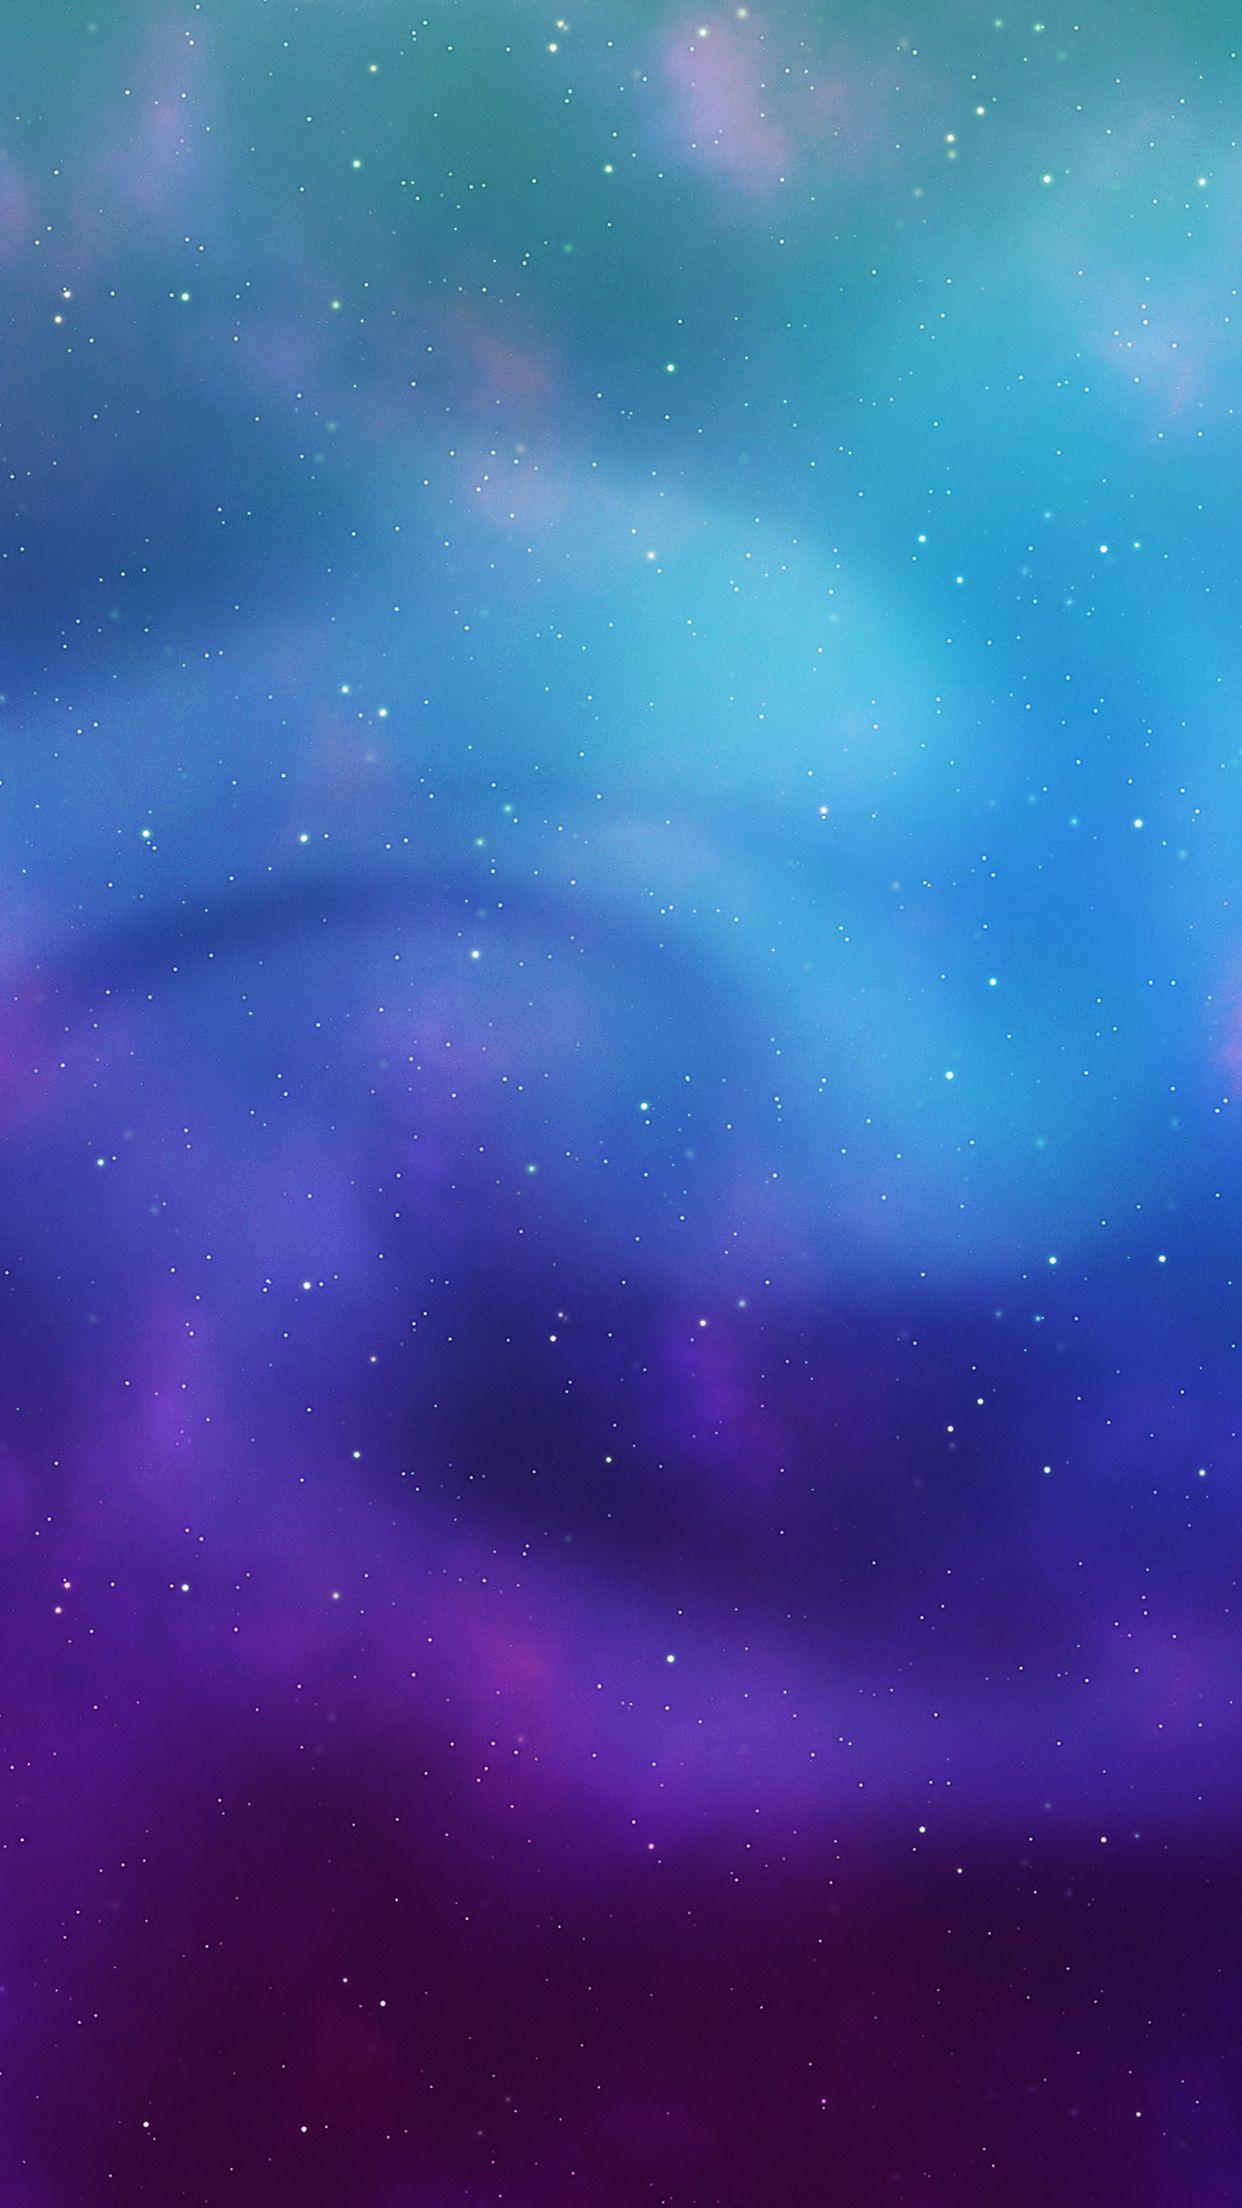 Expansive space wallpaper for iPhone, iPad, and desktop